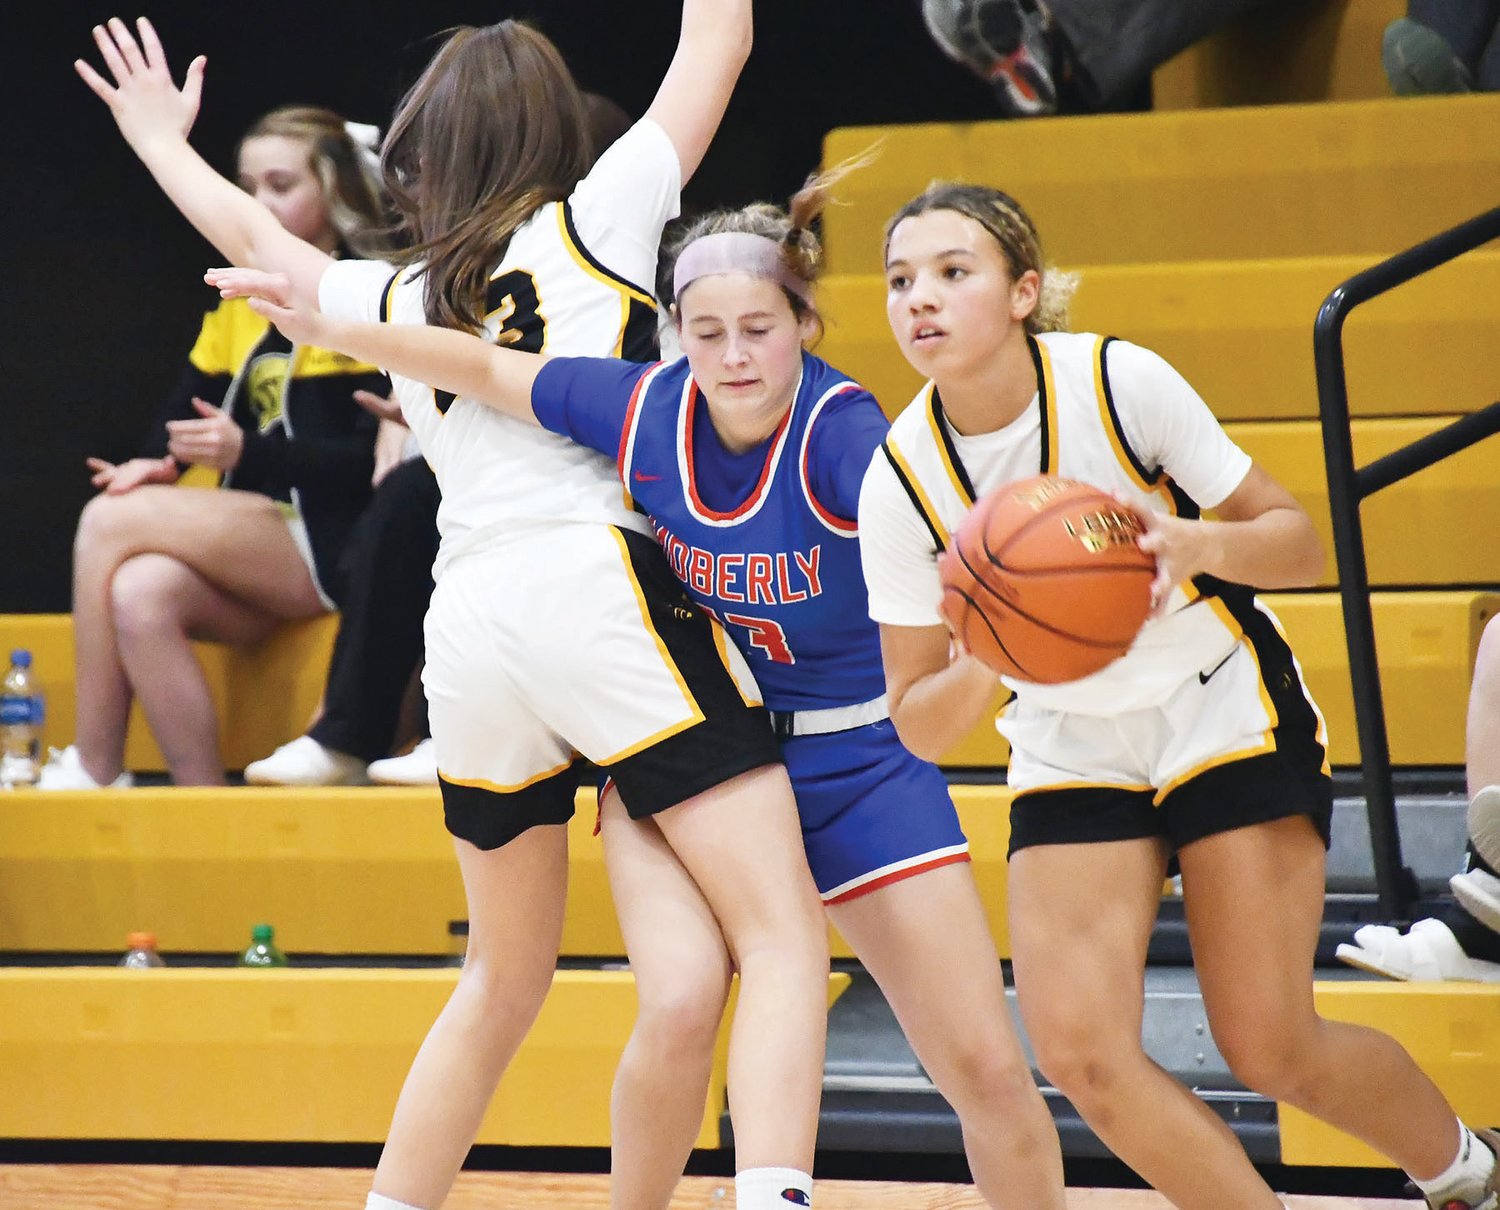 Moberly High School girls' basketball player Elizabeth Reisenauer (13) fights through a screen while playing defense during the Spartans' girls' basketball game on Monday in Monroe City. The Spartans held the Panthers to four points each in both the second and third quarter.